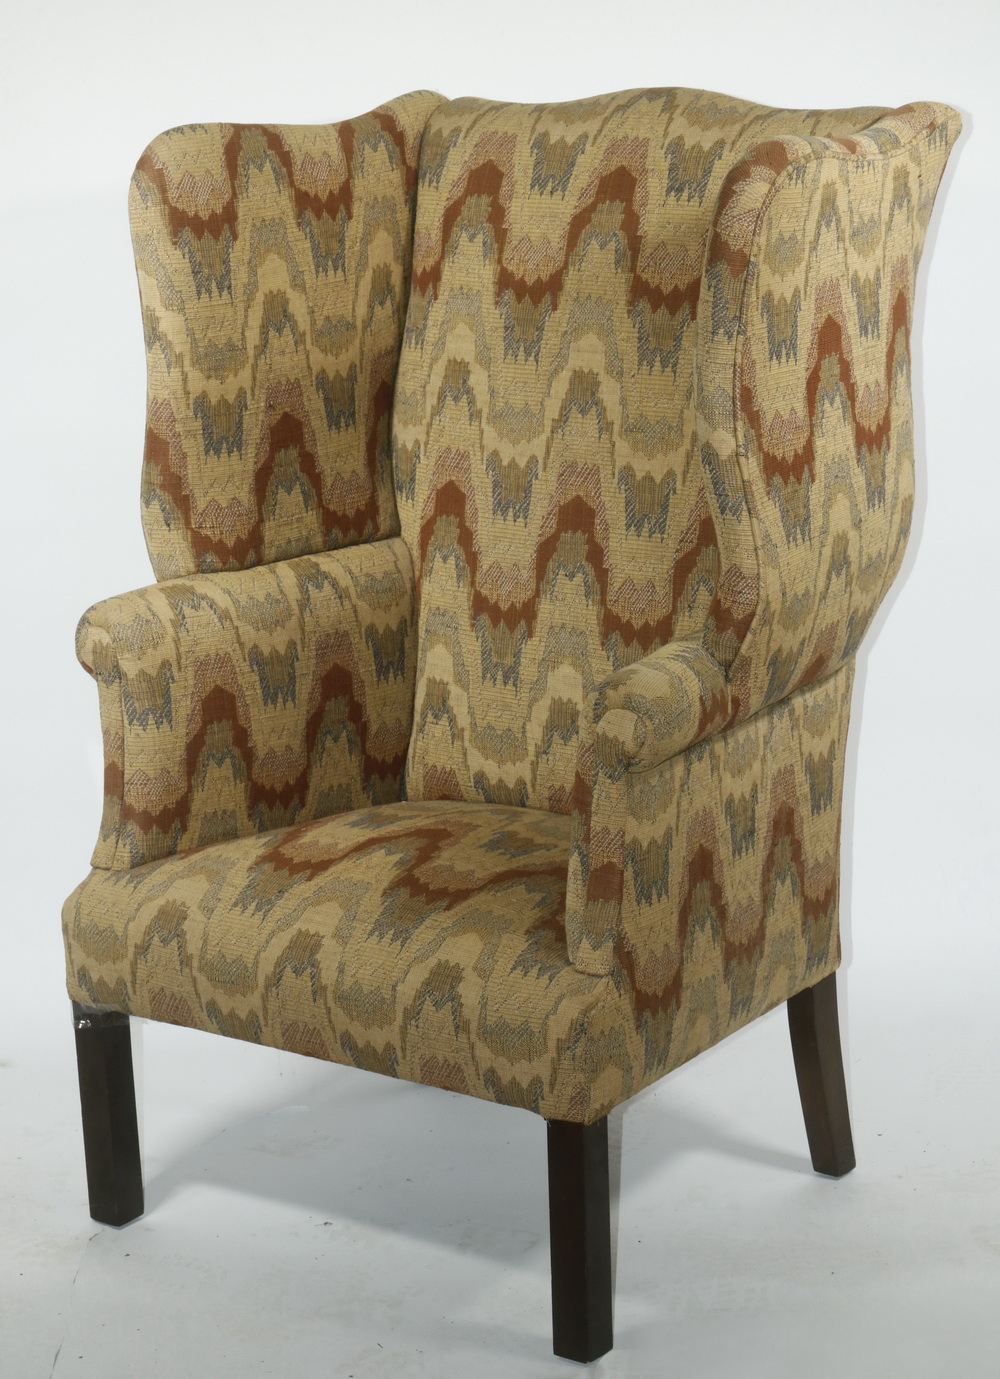 CUSTOM MADE CONTEMPORARY WING CHAIR